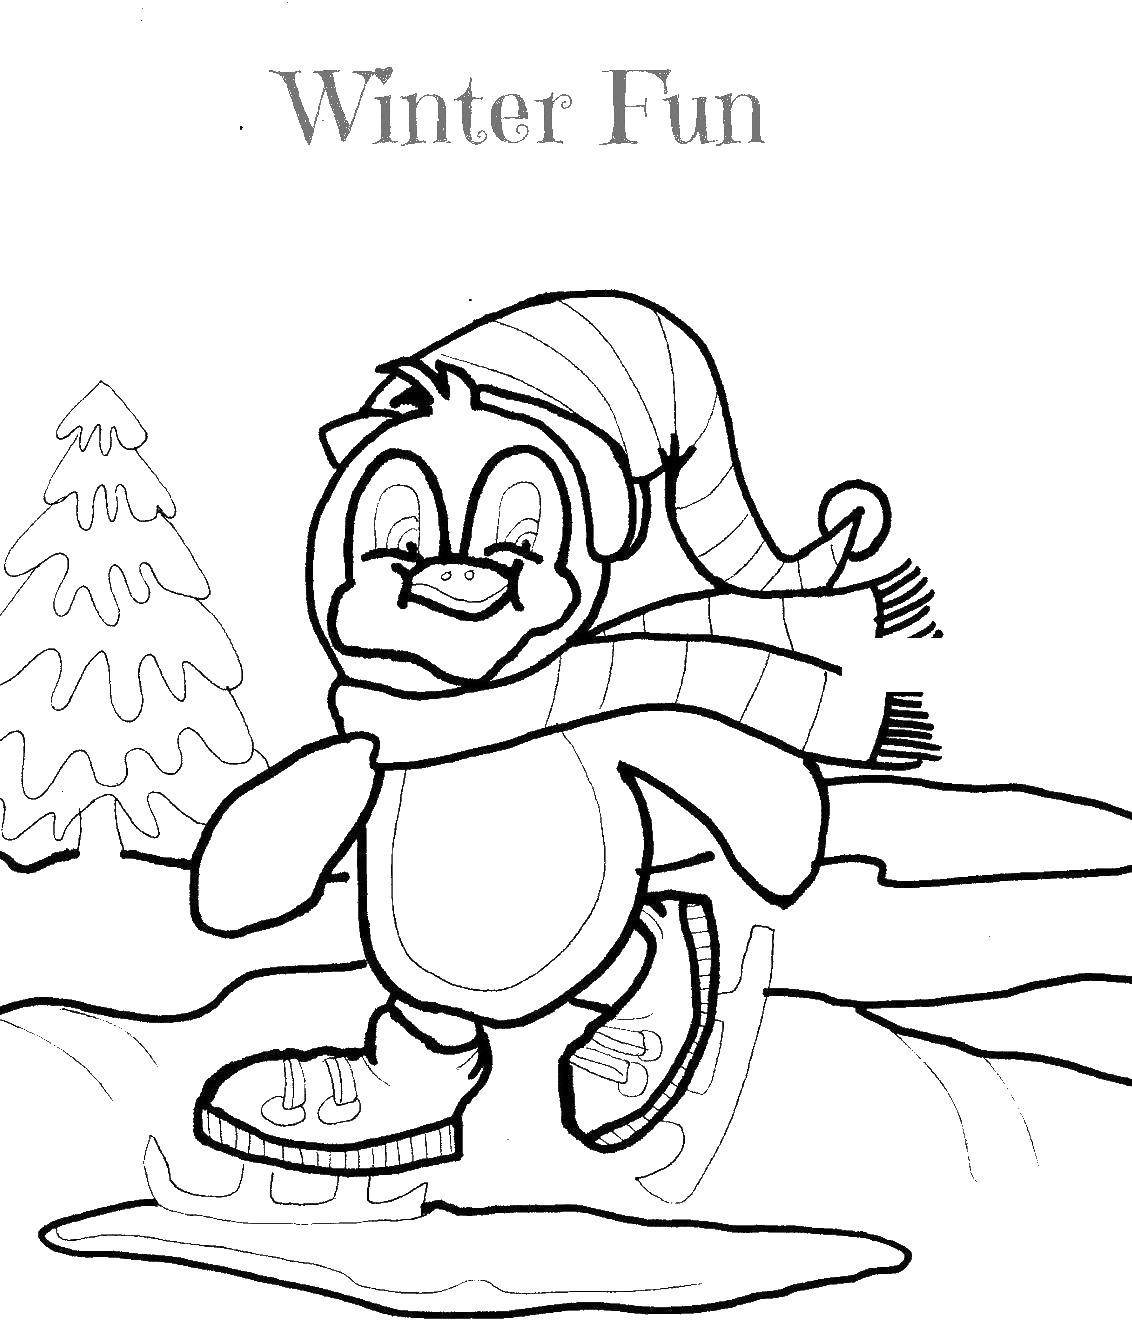 Coloring Penguin on skates. Category winter activities. Tags:  penguin, ice, skating.